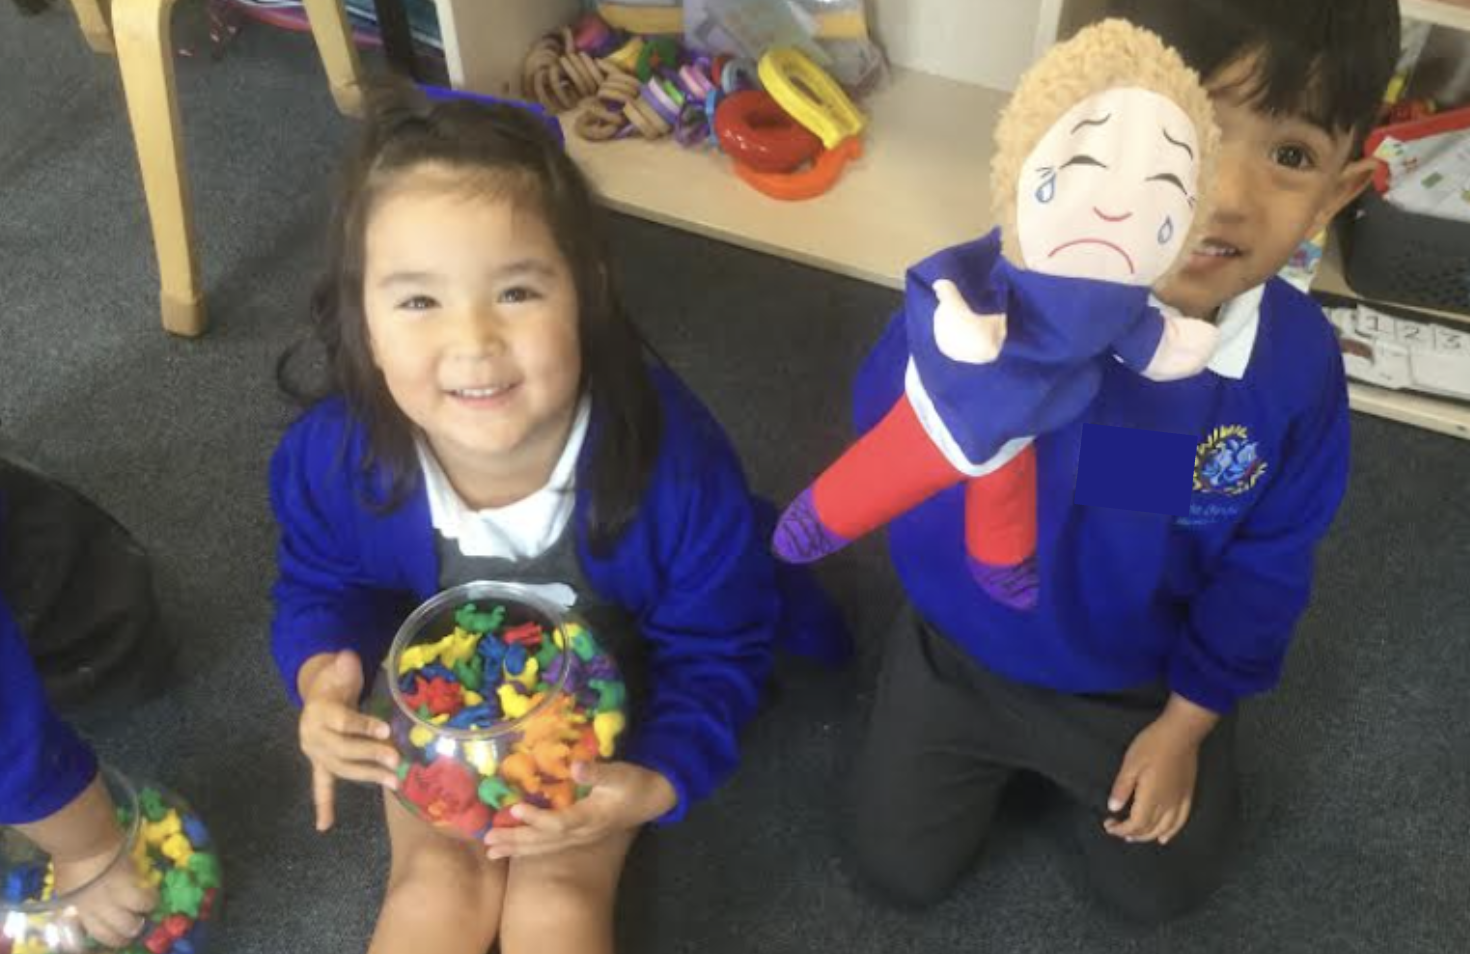 Two students sat on the floor holding toys and smiling for the camera.